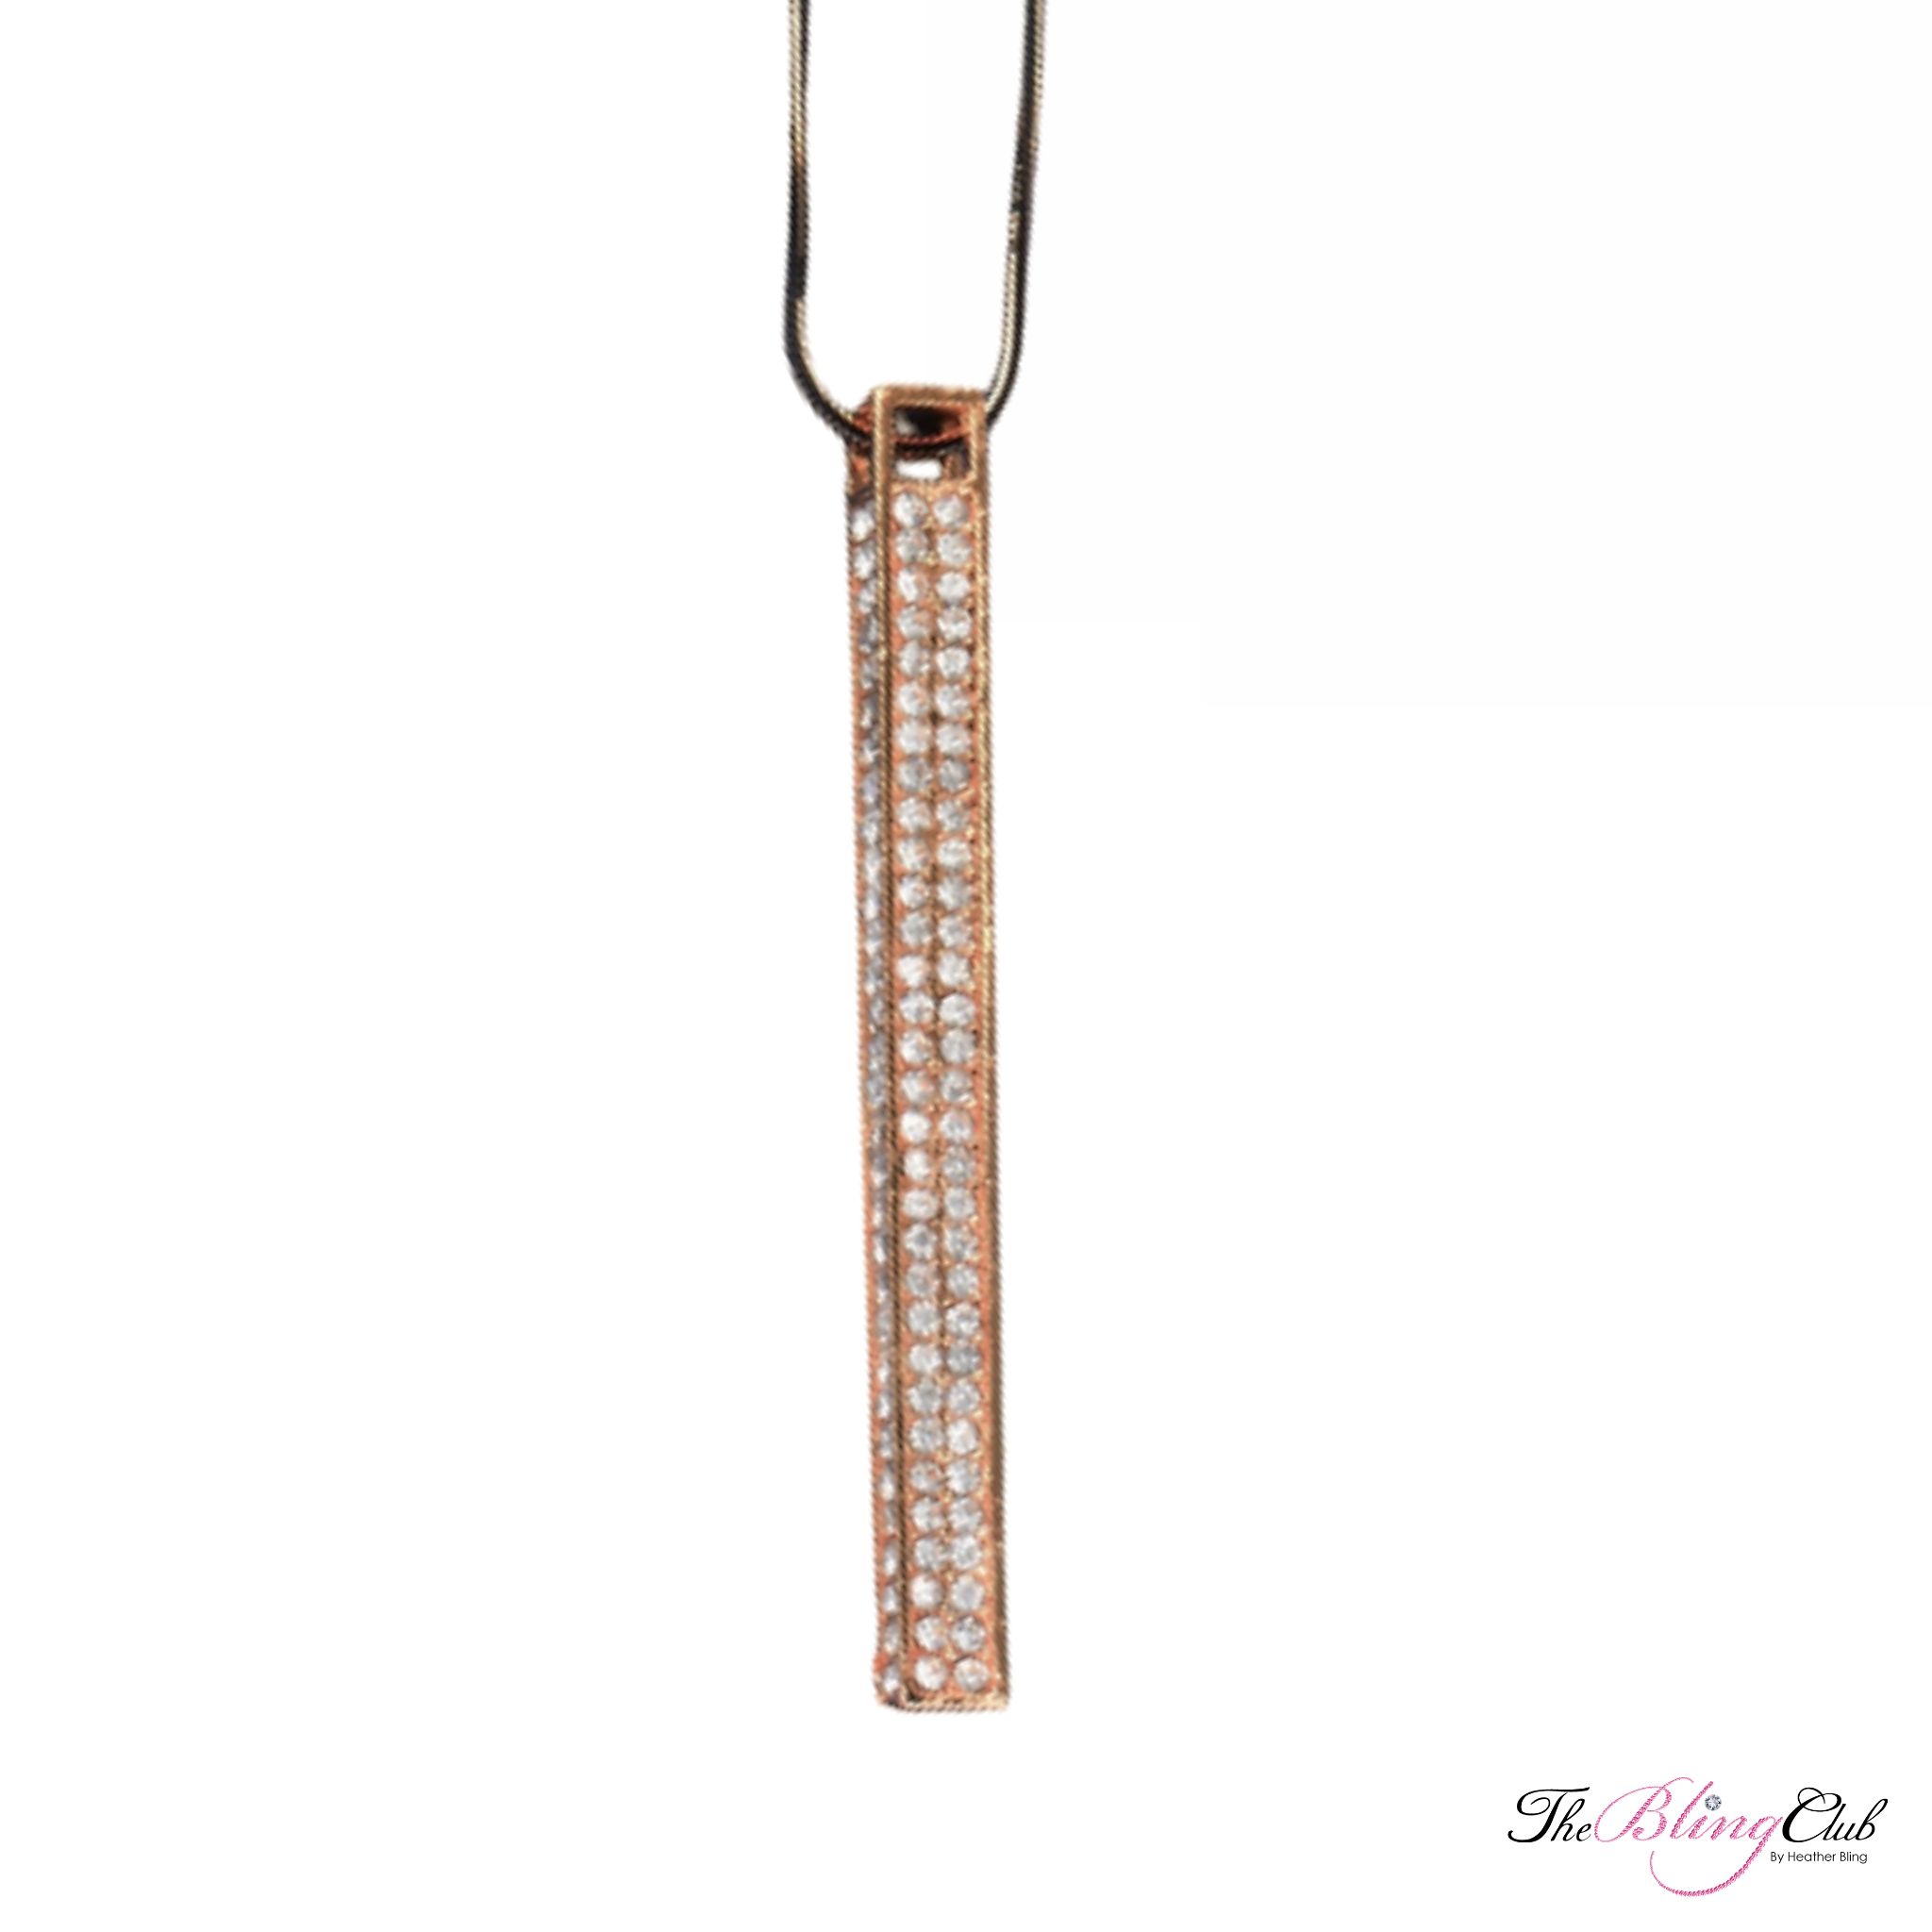 the bling club long white crystal bar pendant necklace iridescent black gold chain